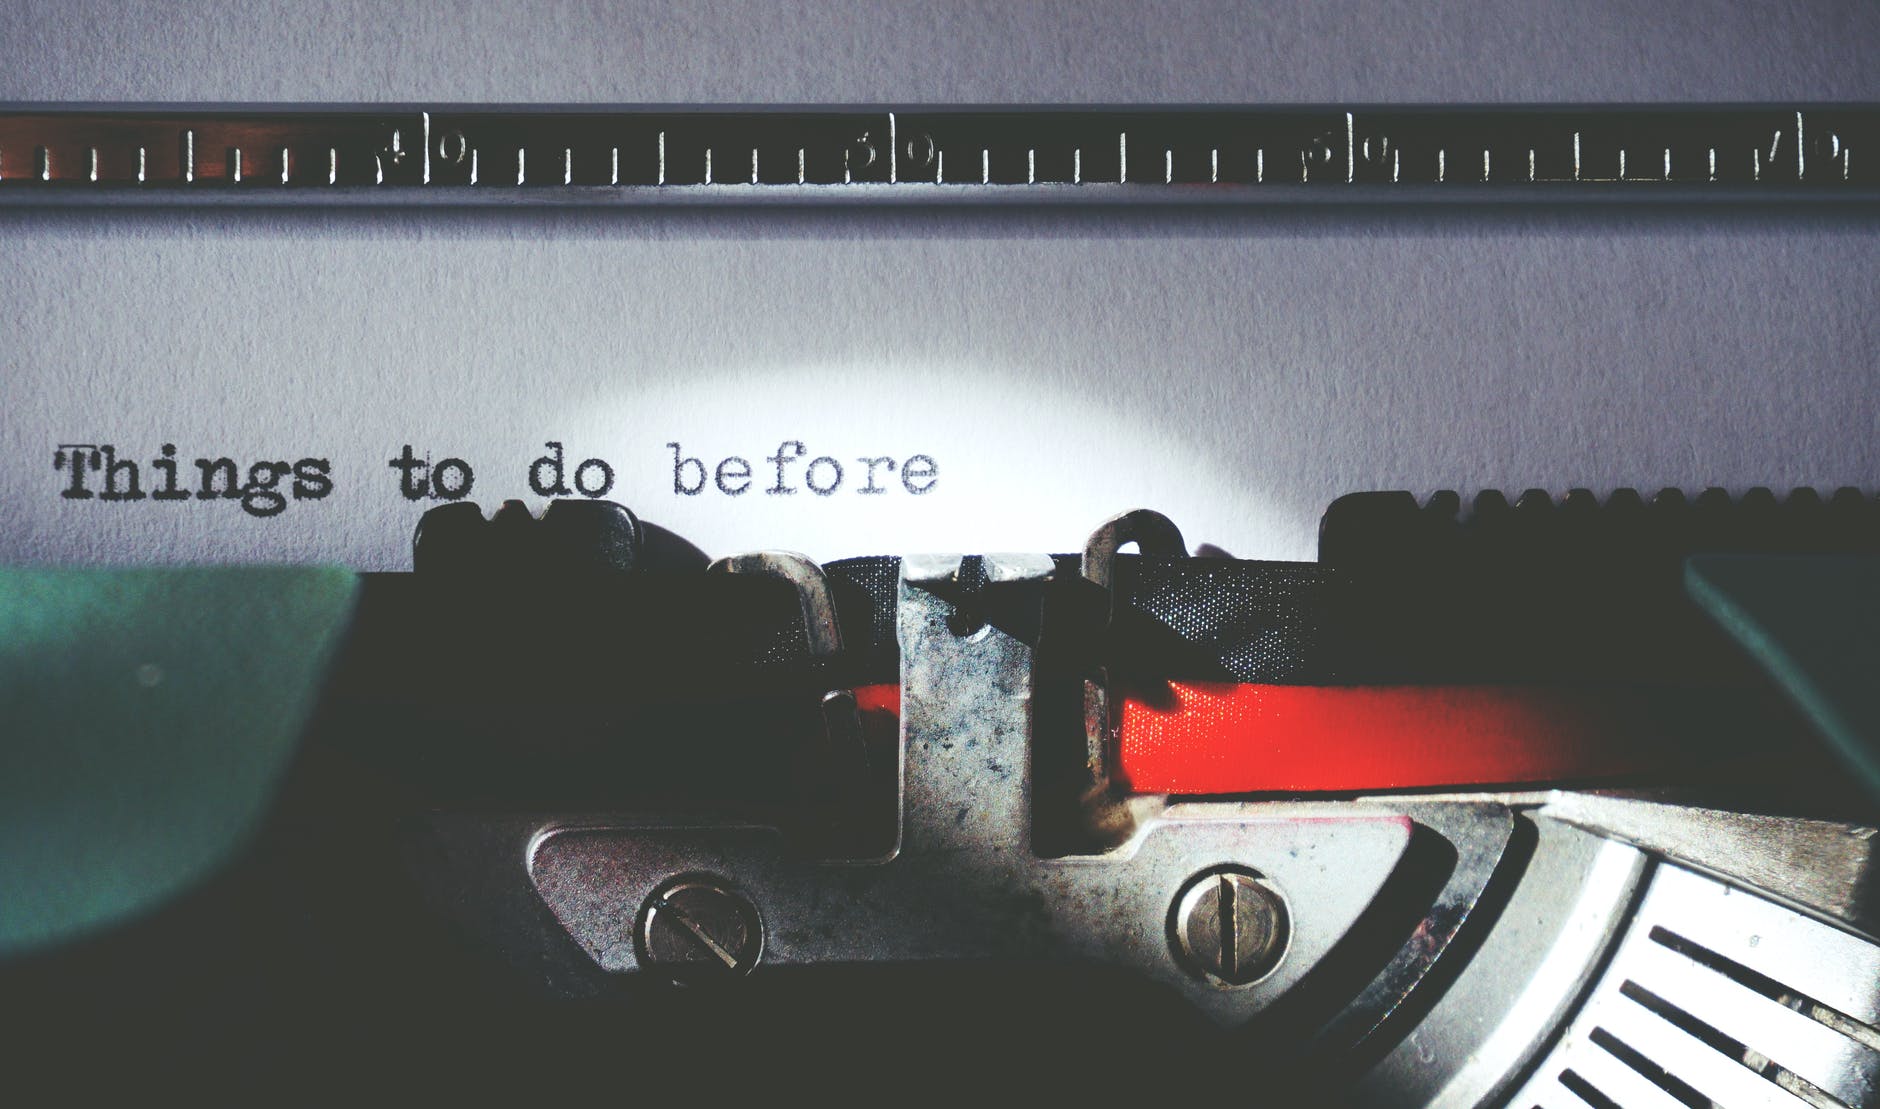 Typewriter with paper saying 'things to do before'